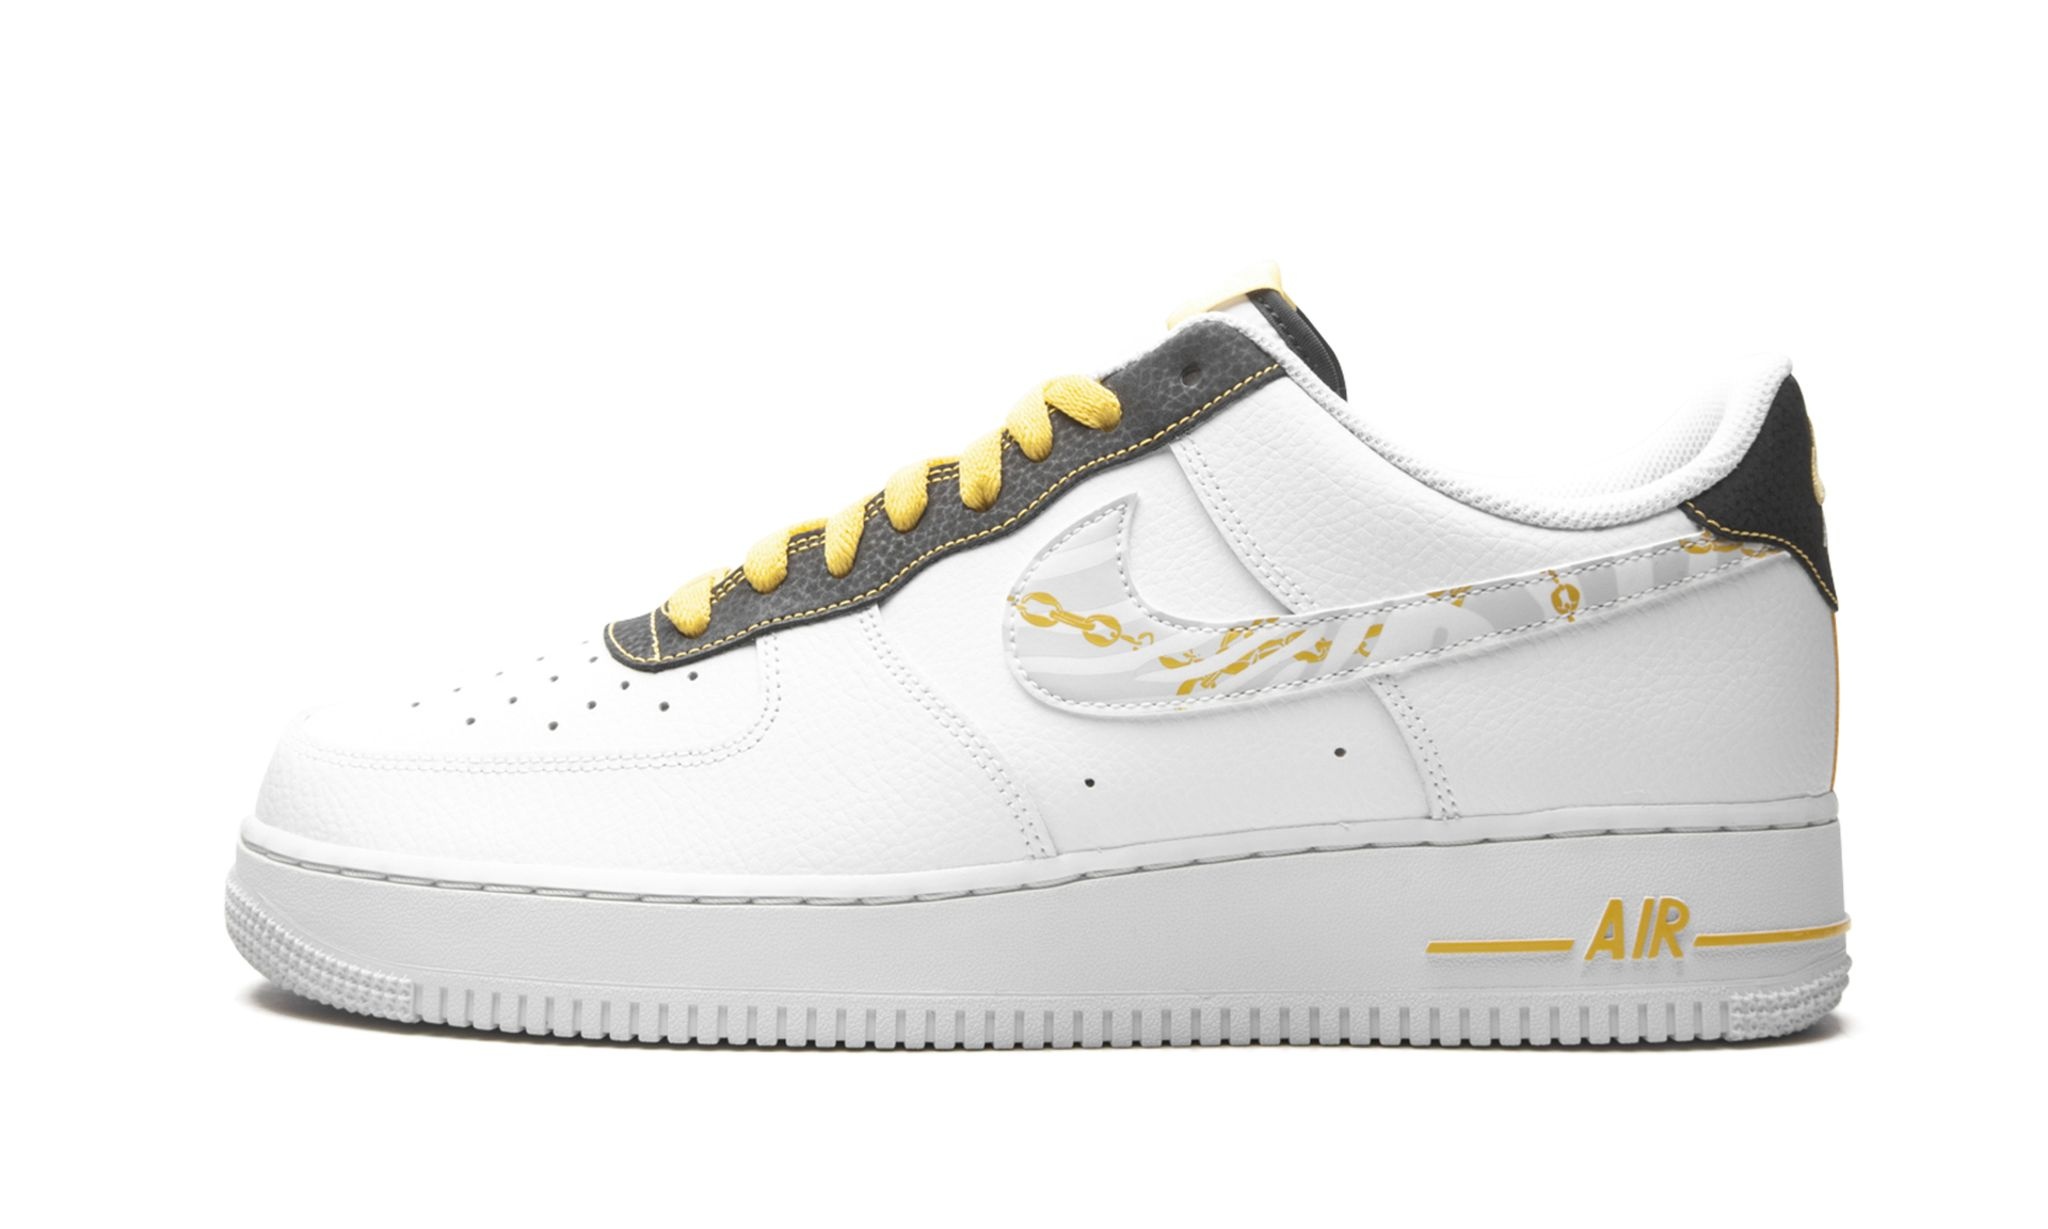 Air Force 1 Low "Gold Link Zebra" - 1